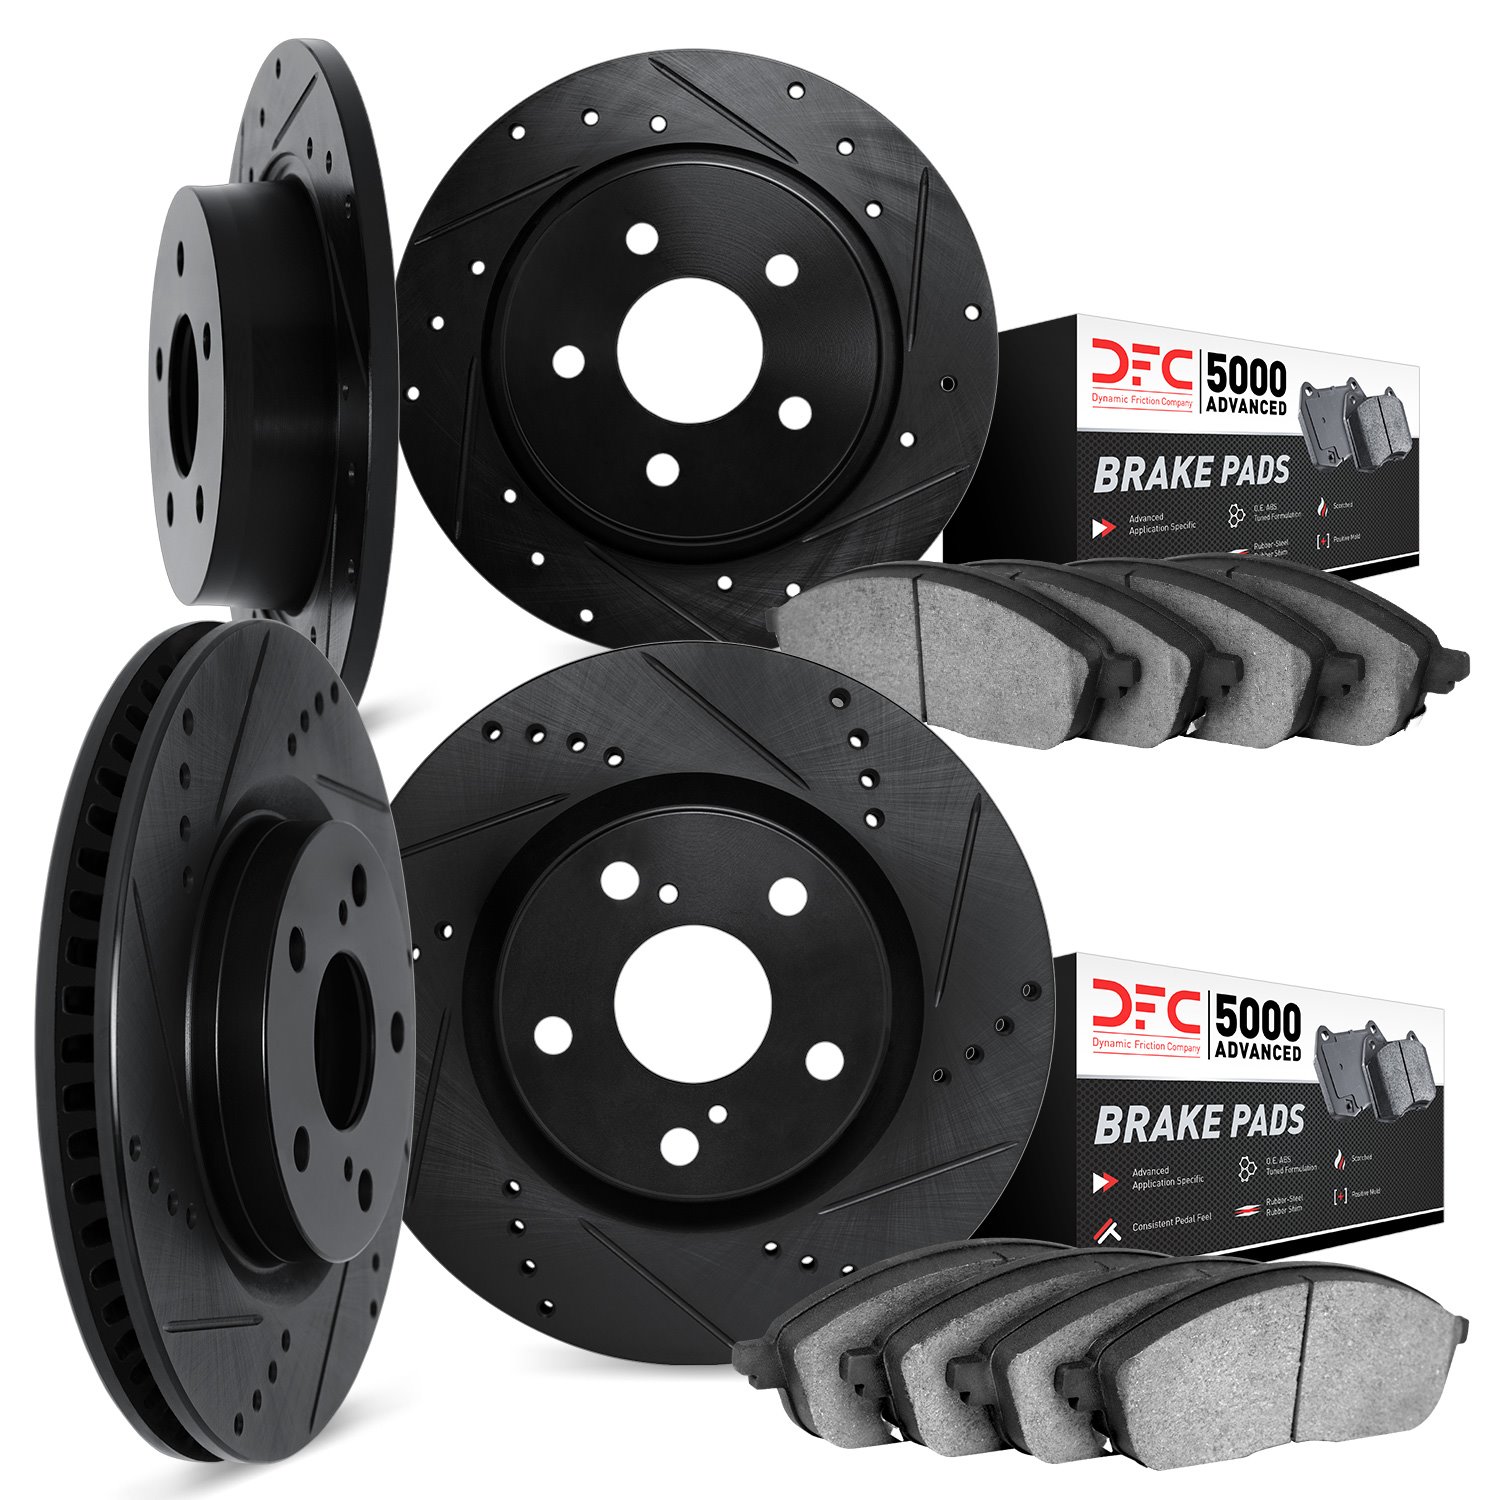 8504-16001 Drilled/Slotted Brake Rotors w/5000 Advanced Brake Pads Kit [Black], 1987-1989 Alfa Romeo, Position: Front and Rear